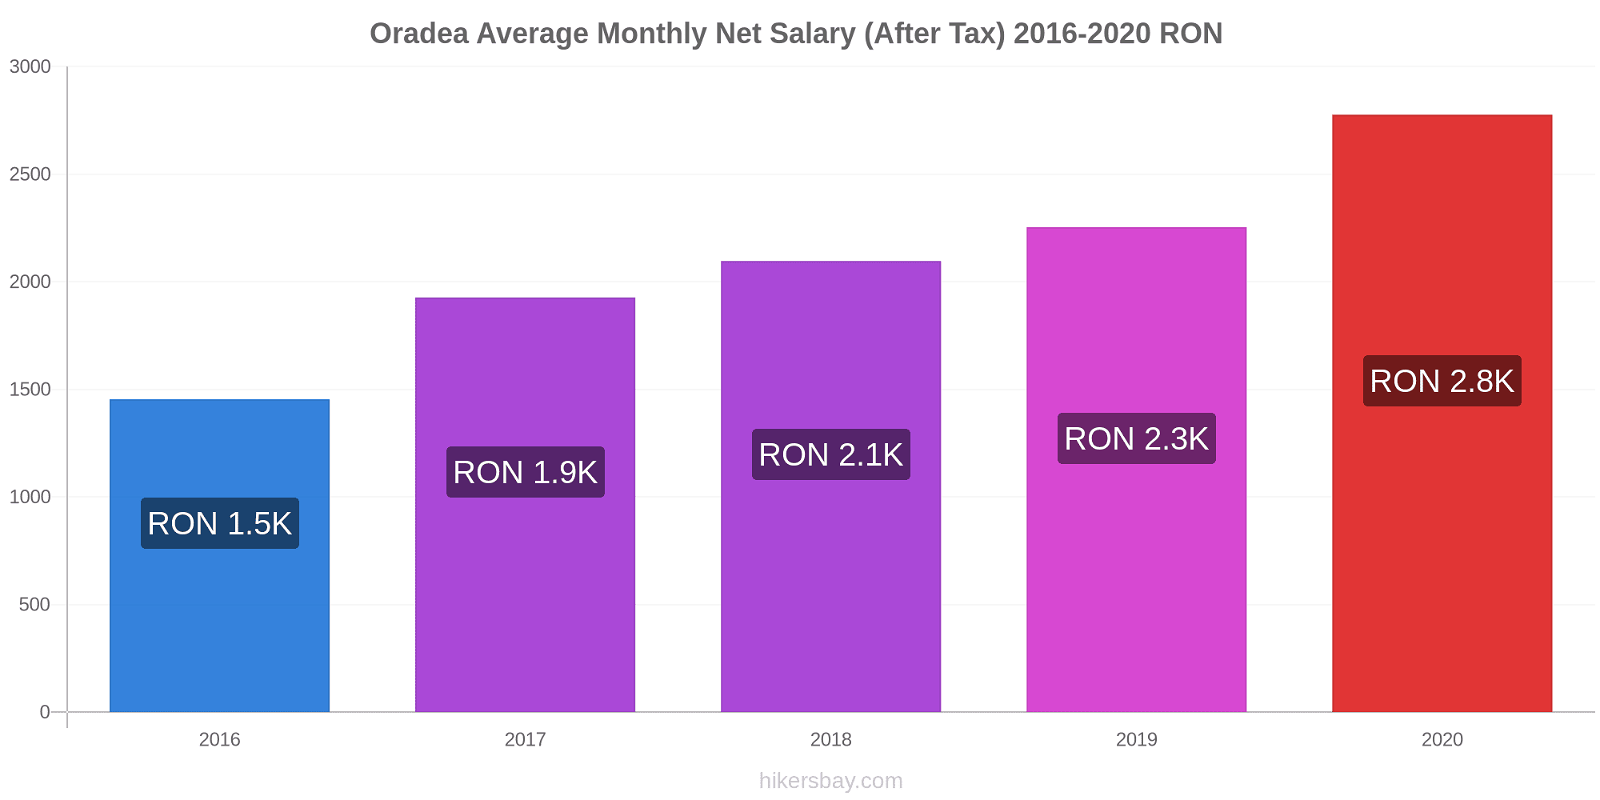 Oradea price changes Average Monthly Net Salary (After Tax) hikersbay.com